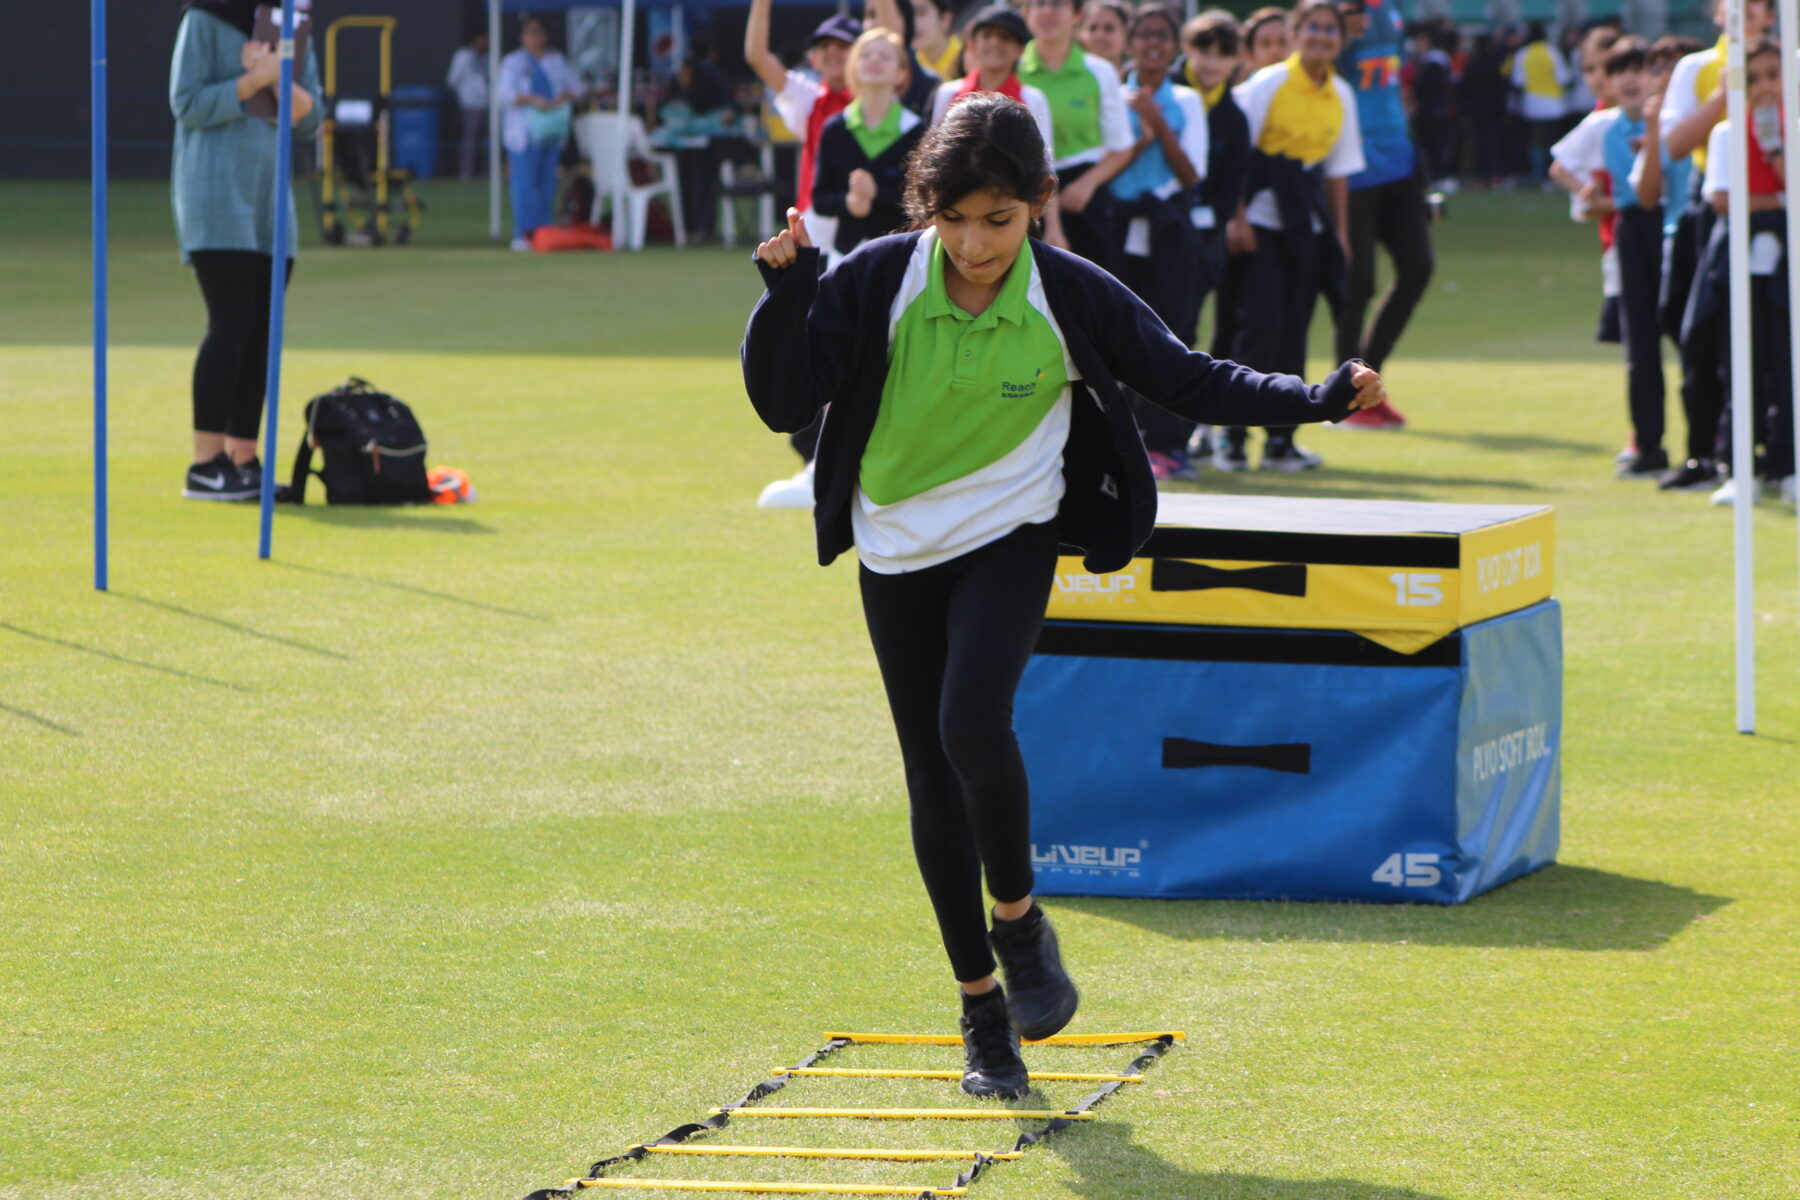 Secondary and Year 6 Sports Day